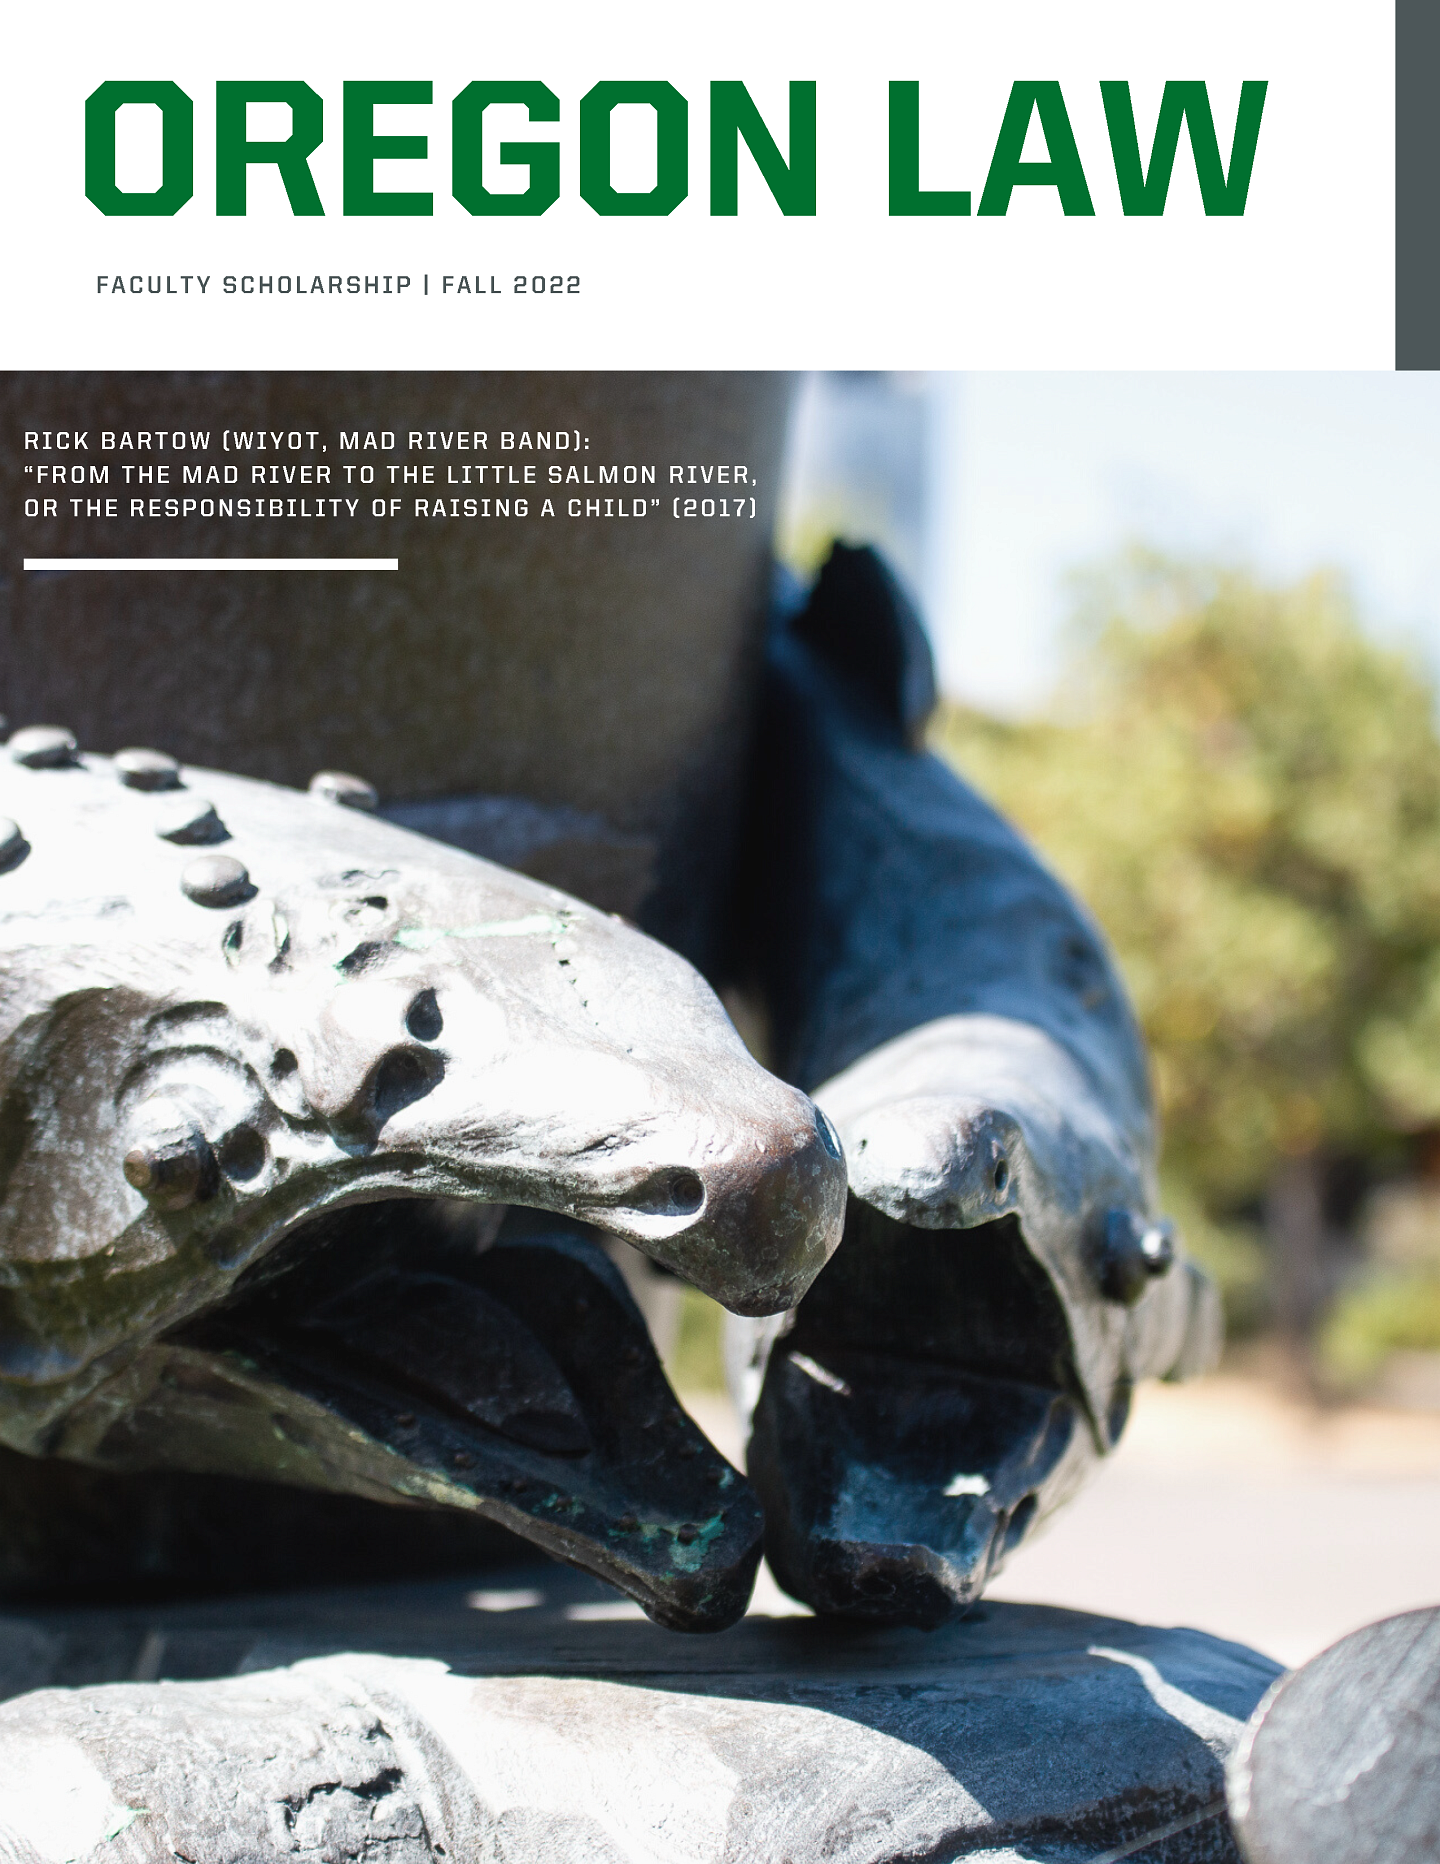 Cover page of faculty brochure featuring a sculpture with wild chinook salmon